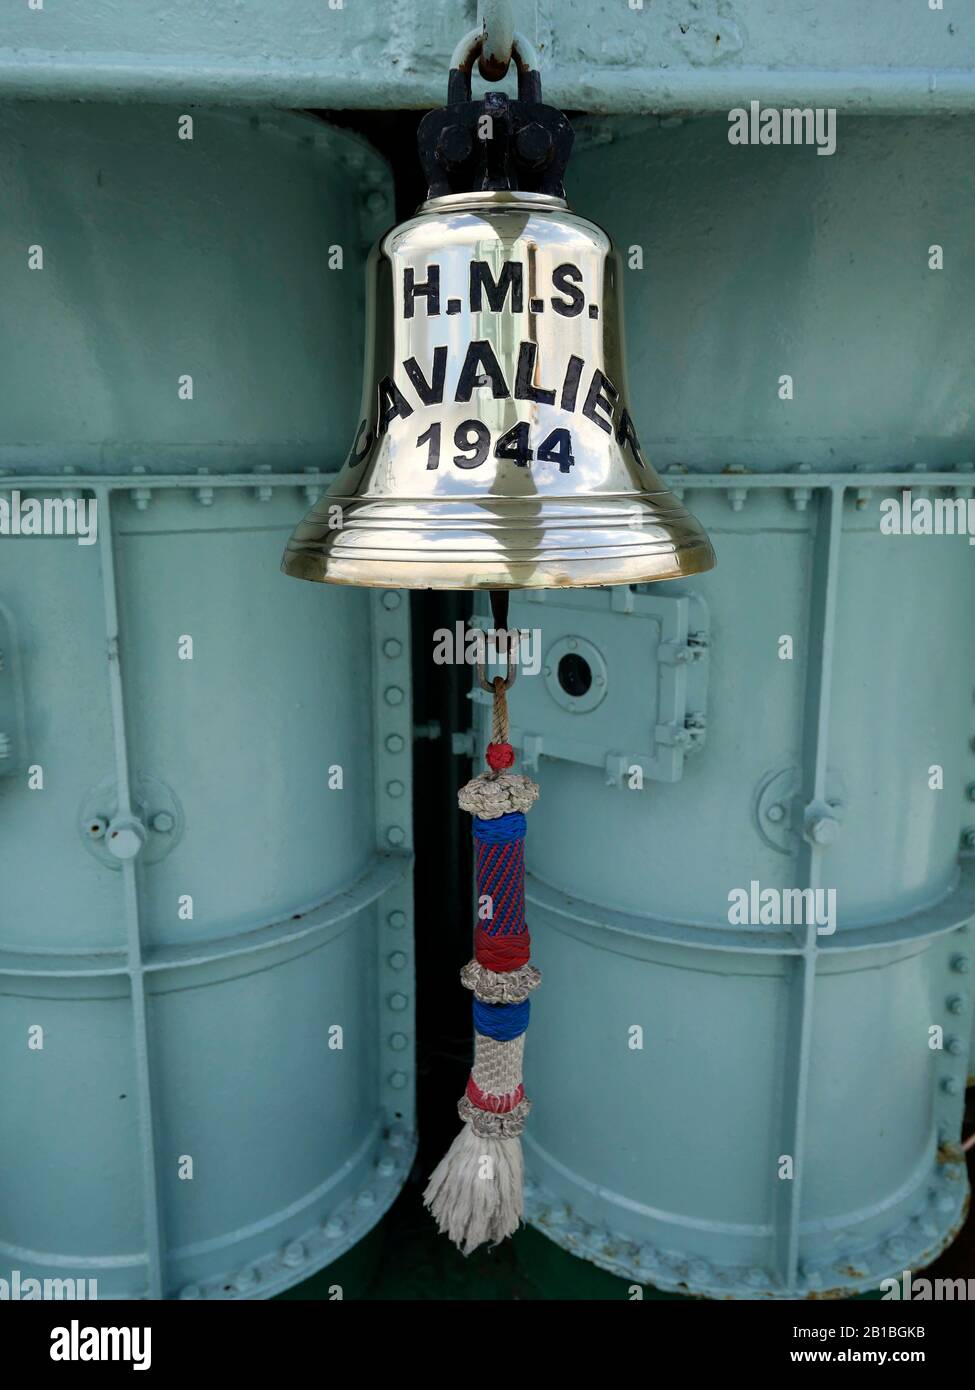 AJAXNETPHOTO. 3RD APRIL, 2019. CHATHAM, ENGLAND. - RINGING THE WATCH - HMS CAVALIER, WORLD WAR II C CLASS DESTROYER PRESERVED AFLOAT IN NR 2 DOCK AT THE CHATHAM HISTORIC DOCKYARD. SHIP'S BELL AND BELL ROPE.PHOTO:JONATHAN EASTLAND/AJAX REF:GX8 190304 20100 Stock Photo